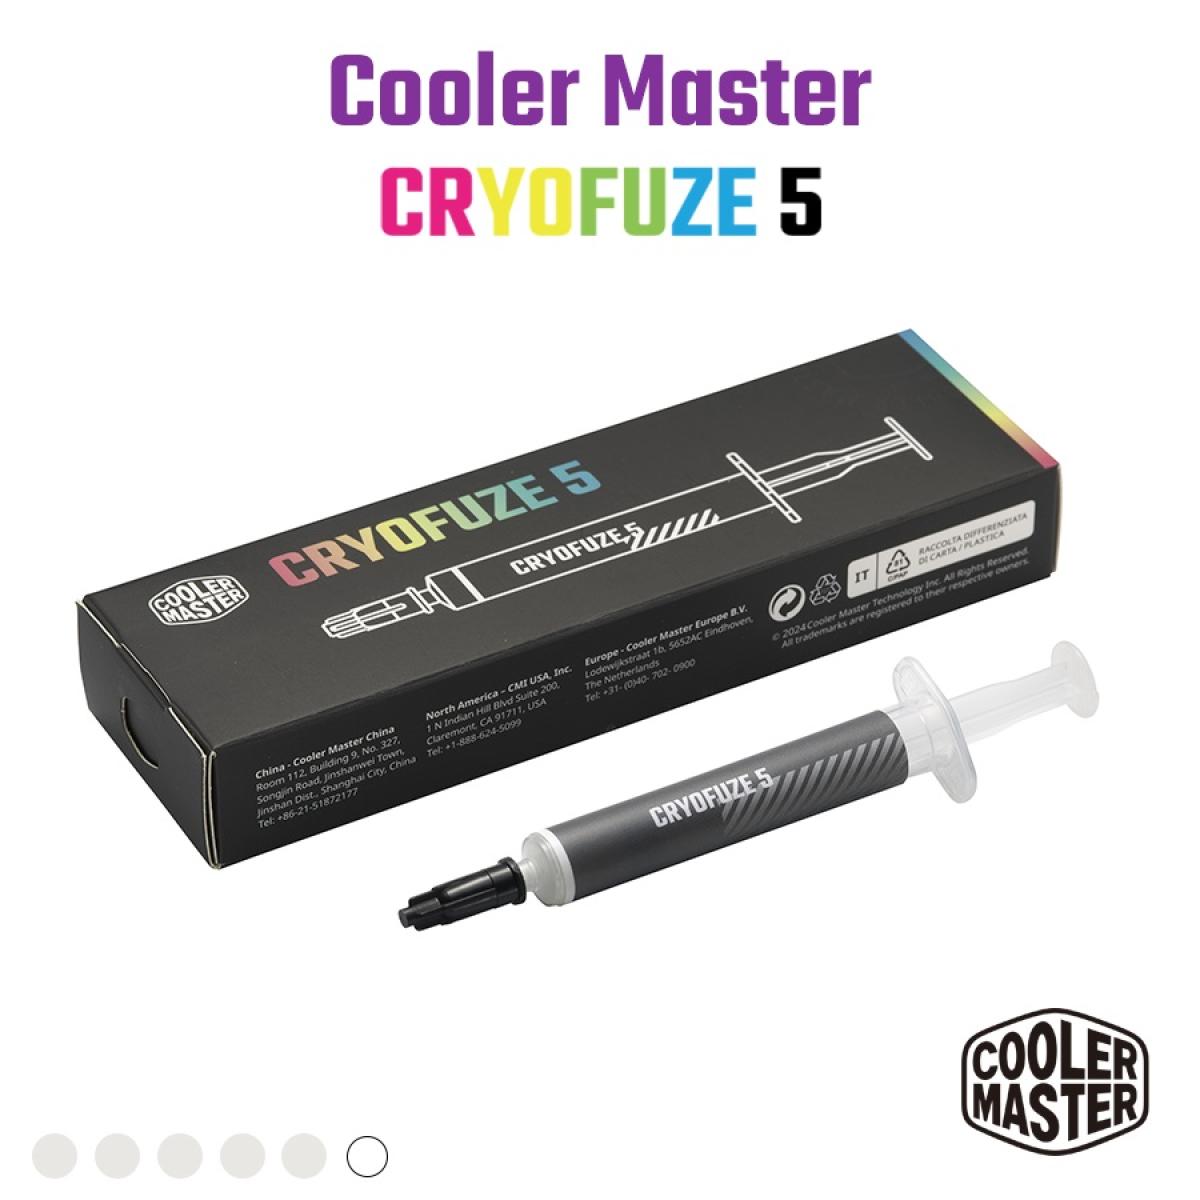 Cooler Master CRYOFUZE 5 (White) High performance Thermal Paste, 12.6 W/mK High Thermal Conductivity w/ Low Thermal Impedance - 3g Weight